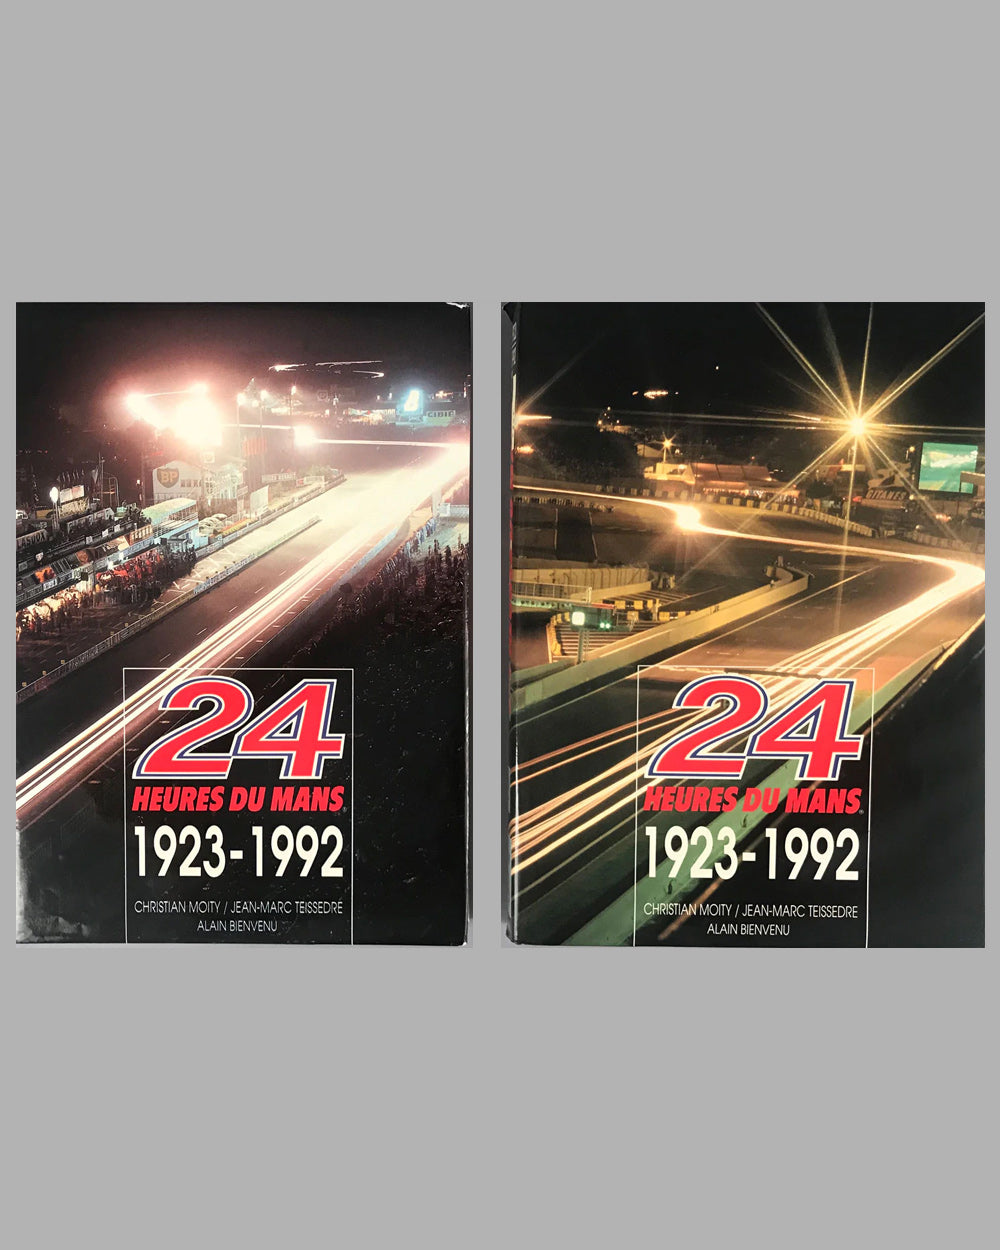 24 Heures du Mans 1923-1992 books - Two volumes by Moity, Teissedre and Bienvenu